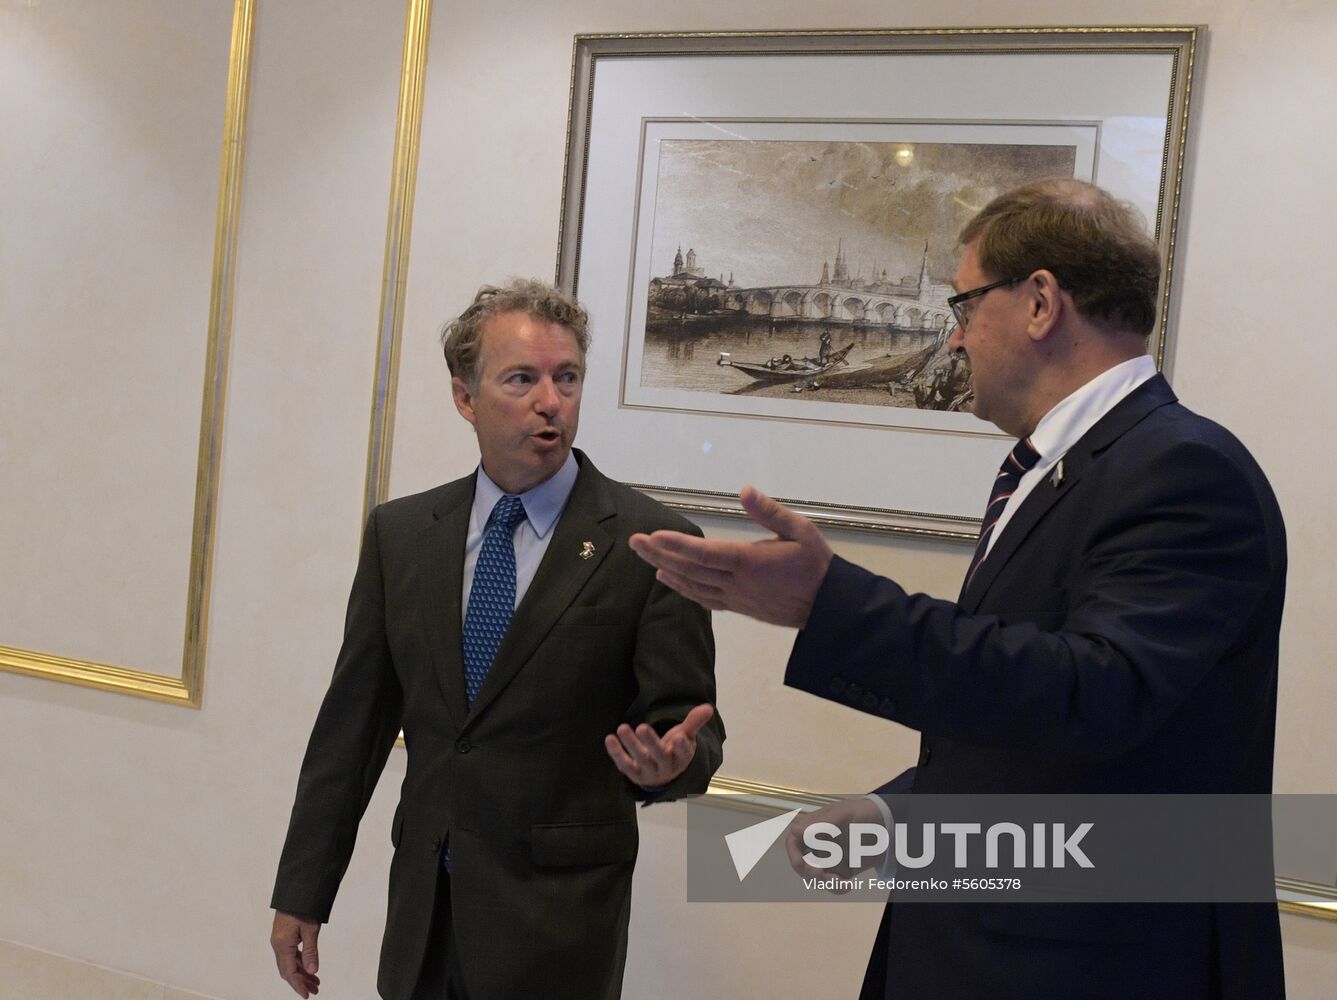 Federation Council Committee on Foreign Affairs Konstantin Kosachev meets with US Senator Rand Paul